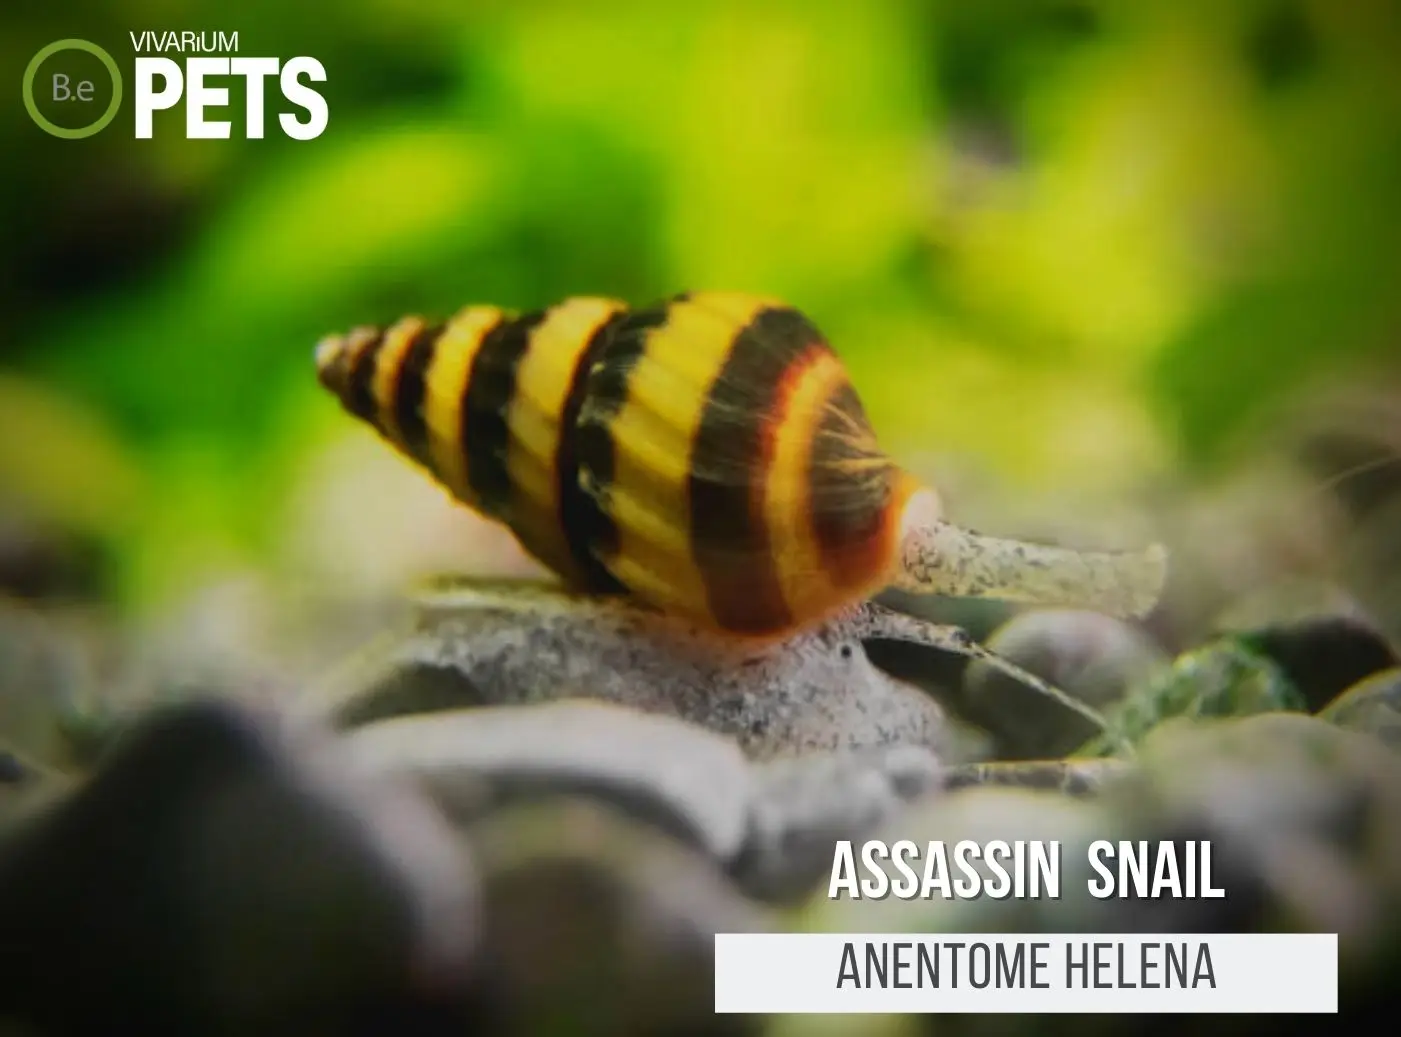 The Ultimate Anentome helena "Assassin Snail" Care Guide